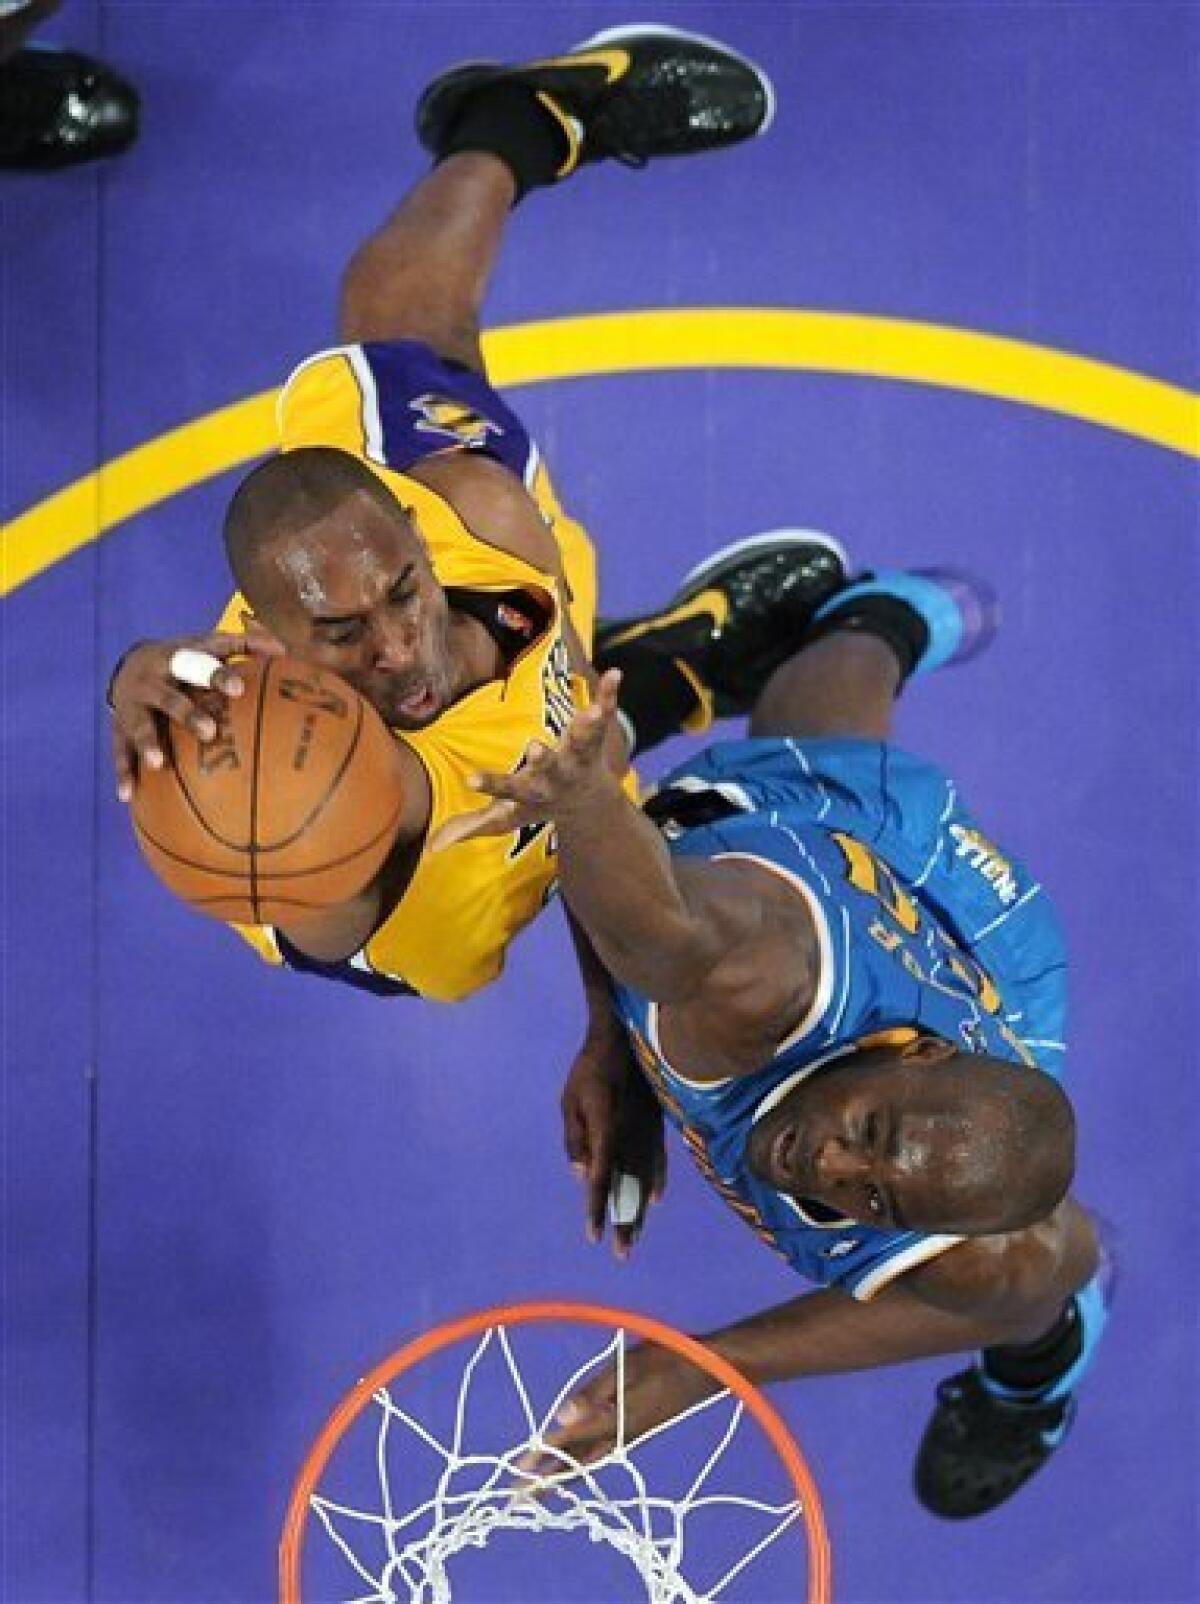 Los Angeles Lakers guard Kobe Bryant dunks in the first half of